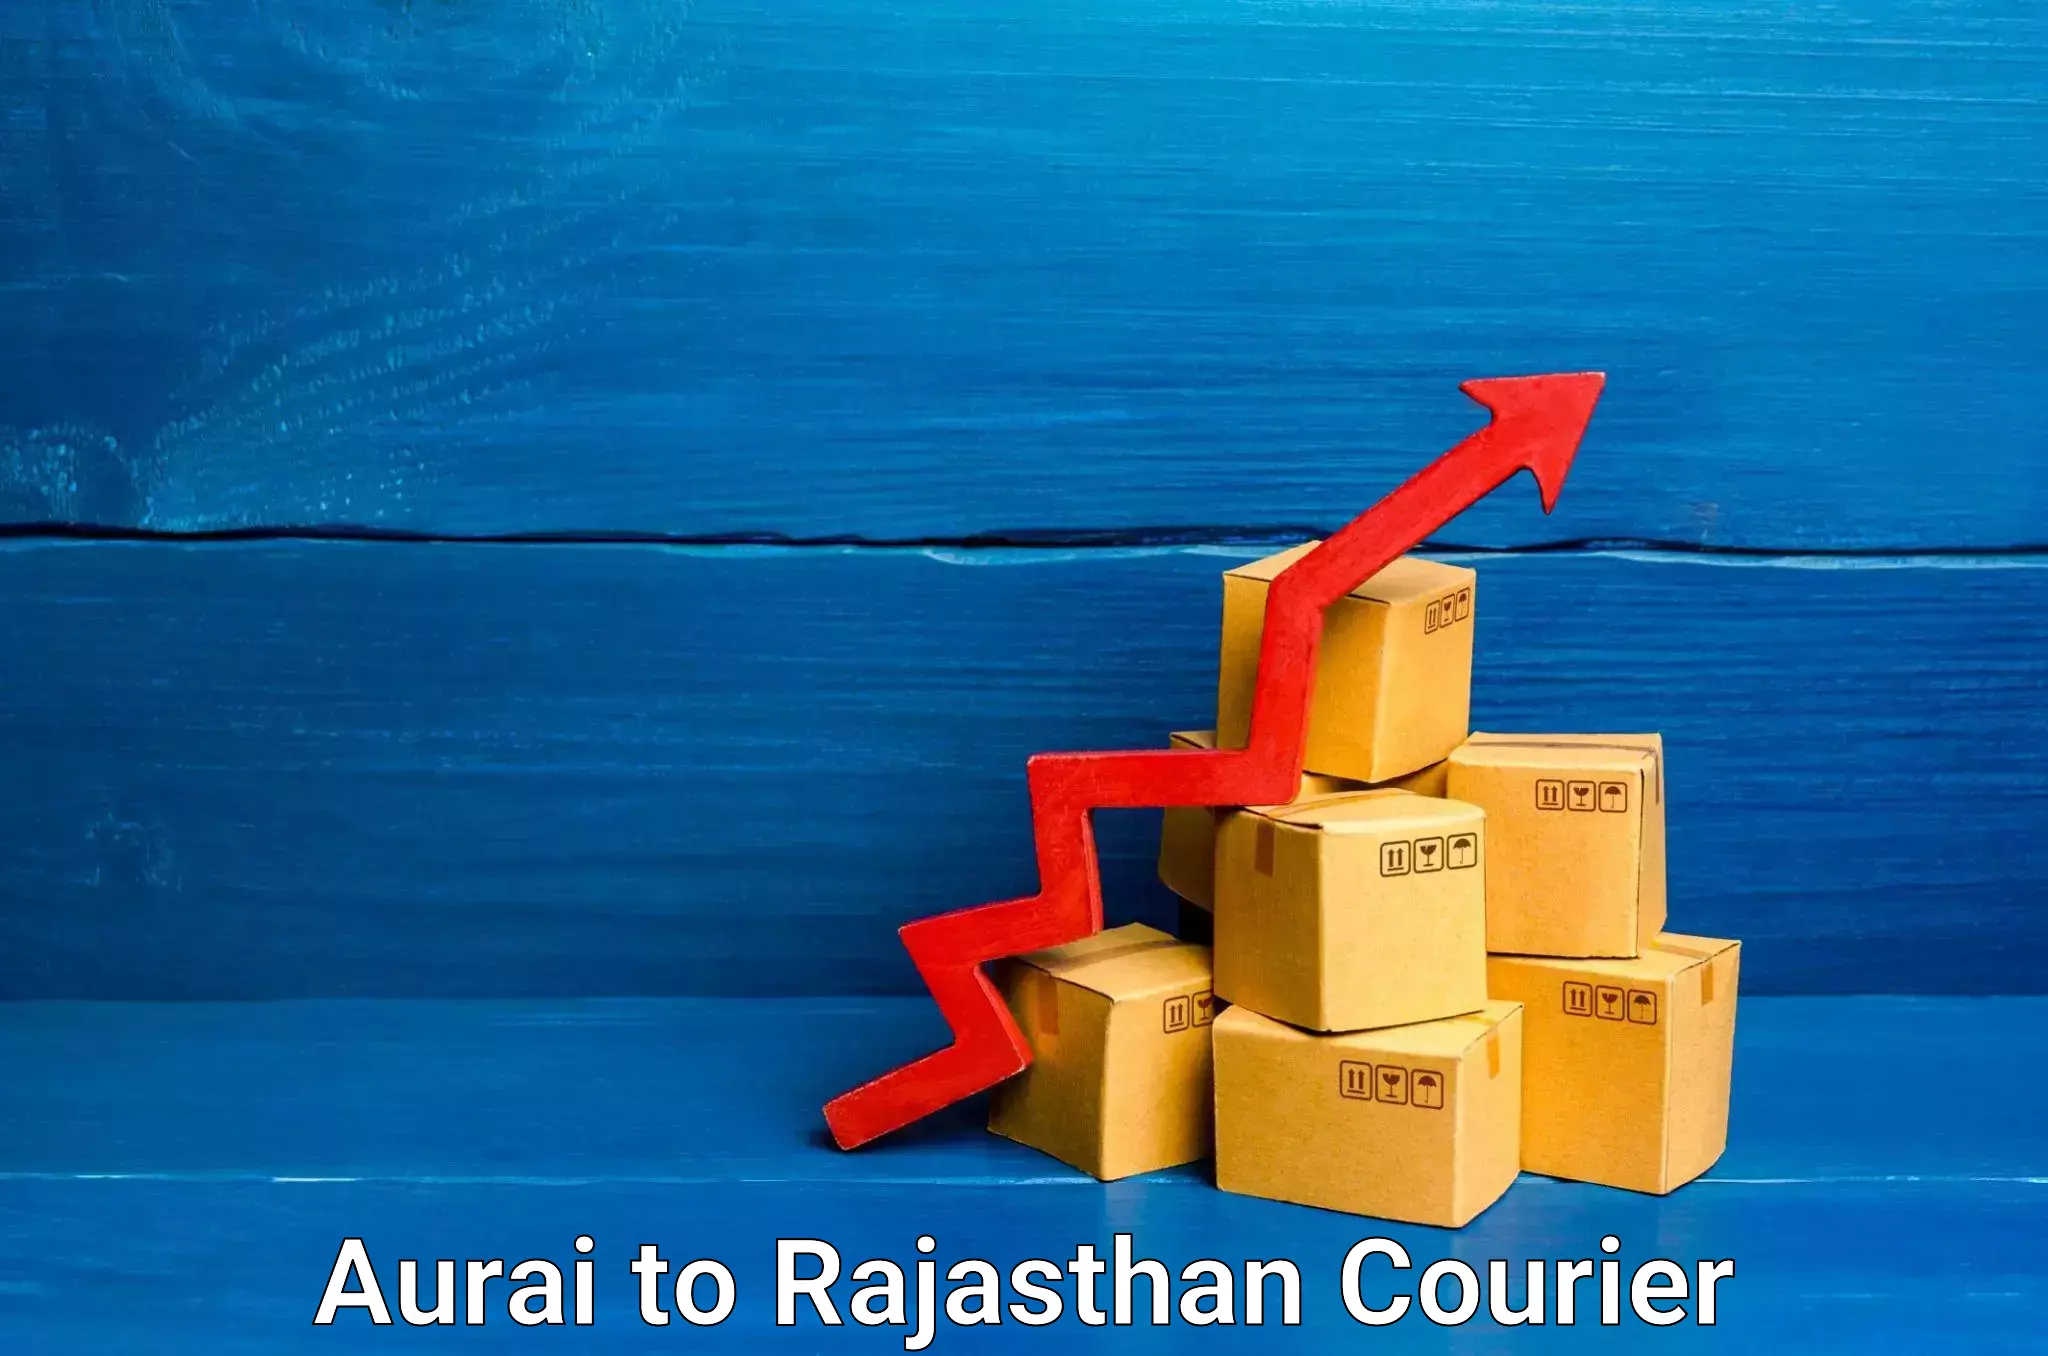 Hassle-free relocation Aurai to Rajasthan